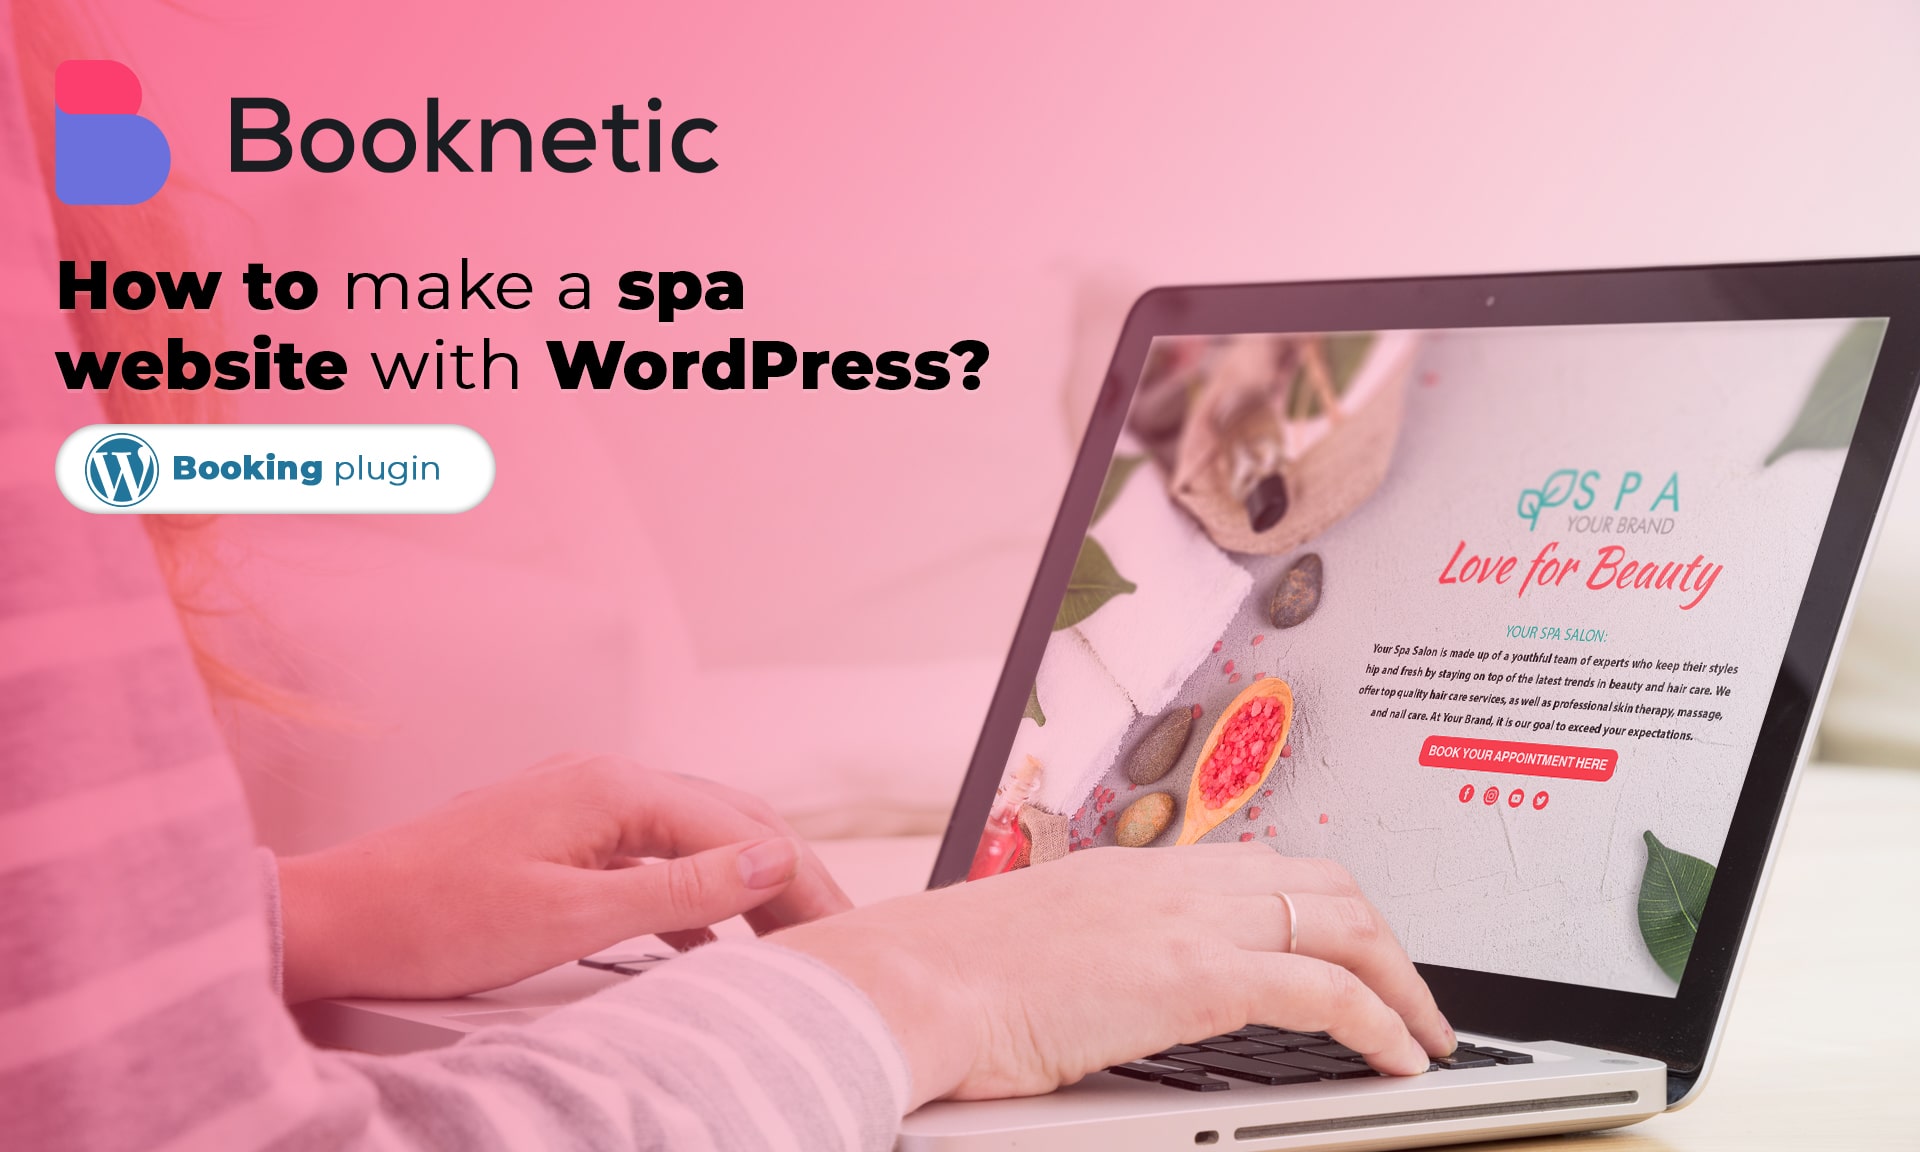 How to Make a Spa Website with WordPress?